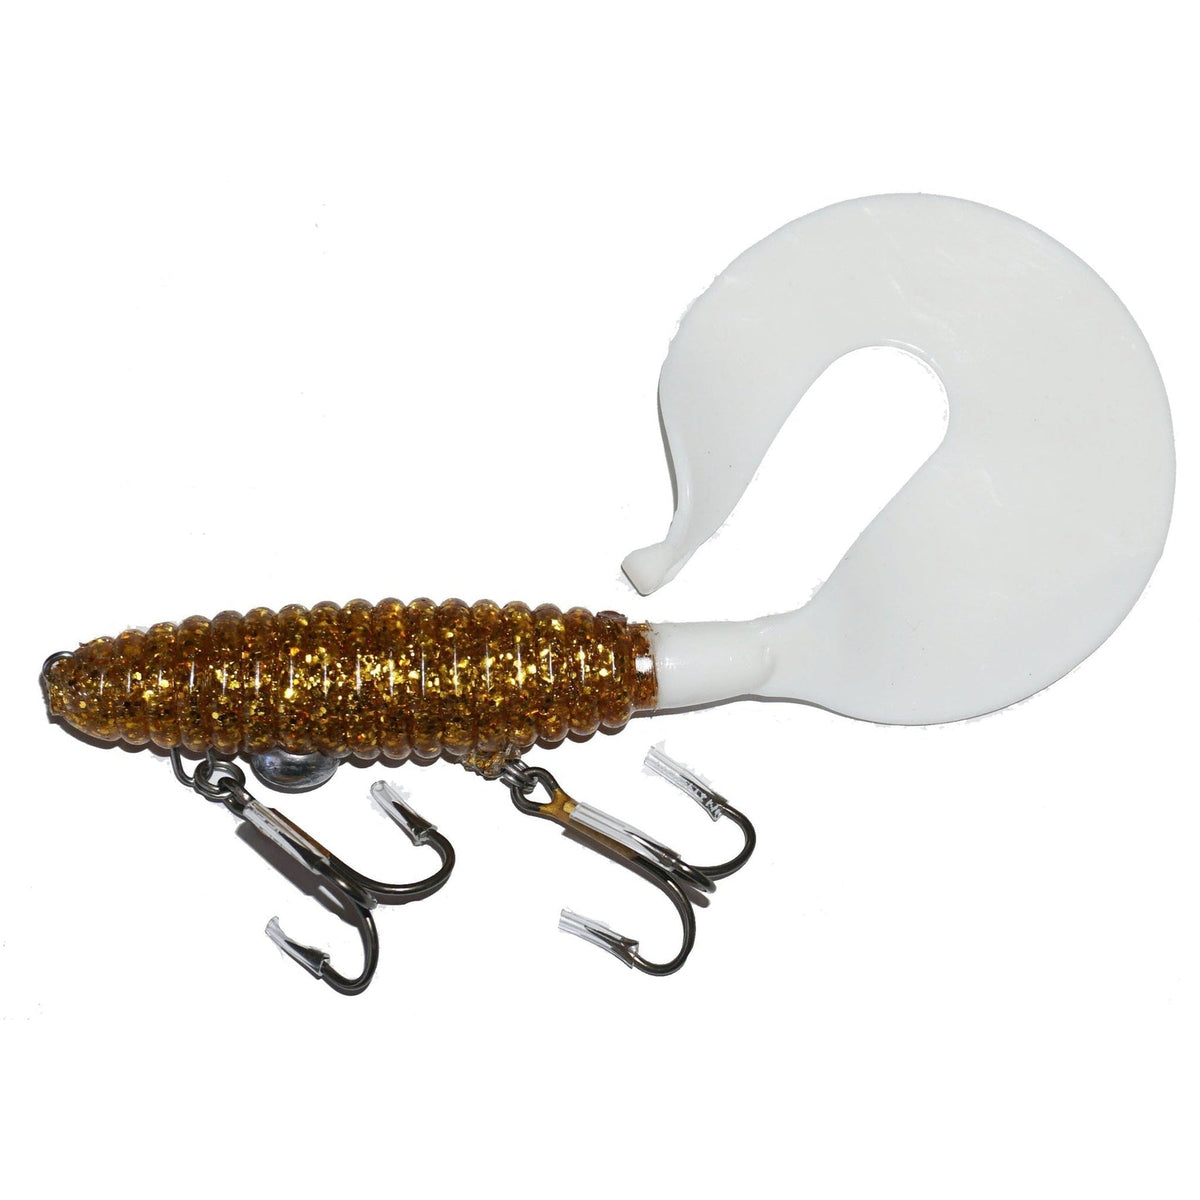 View of Rubber Whale Tail Plastics 11" Walleye / White Tail available at EZOKO Pike and Musky Shop